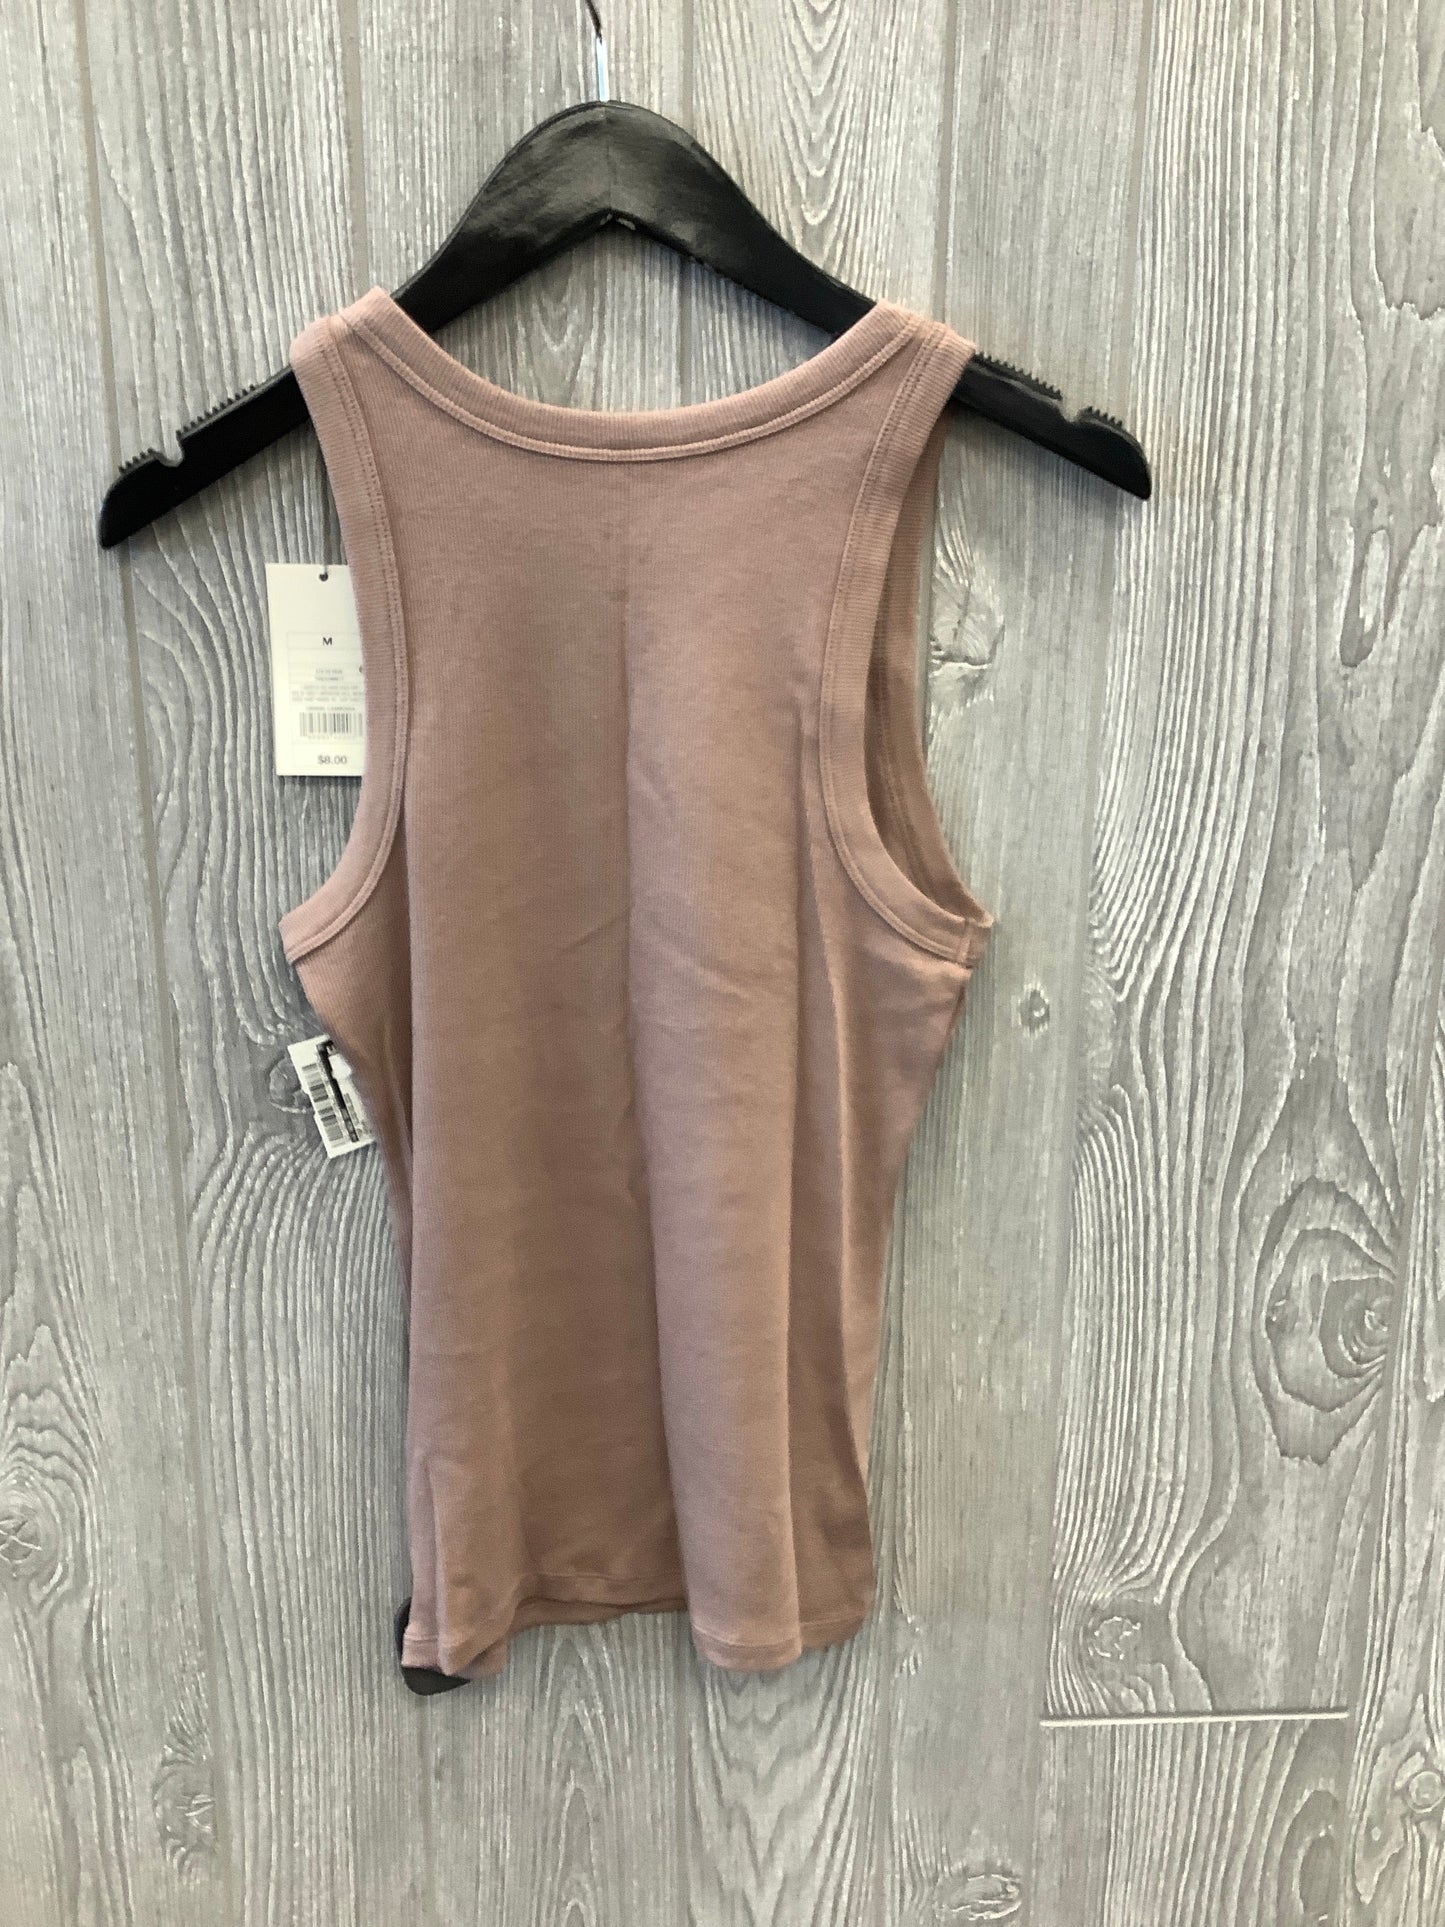 Brown Top Sleeveless A New Day, Size M